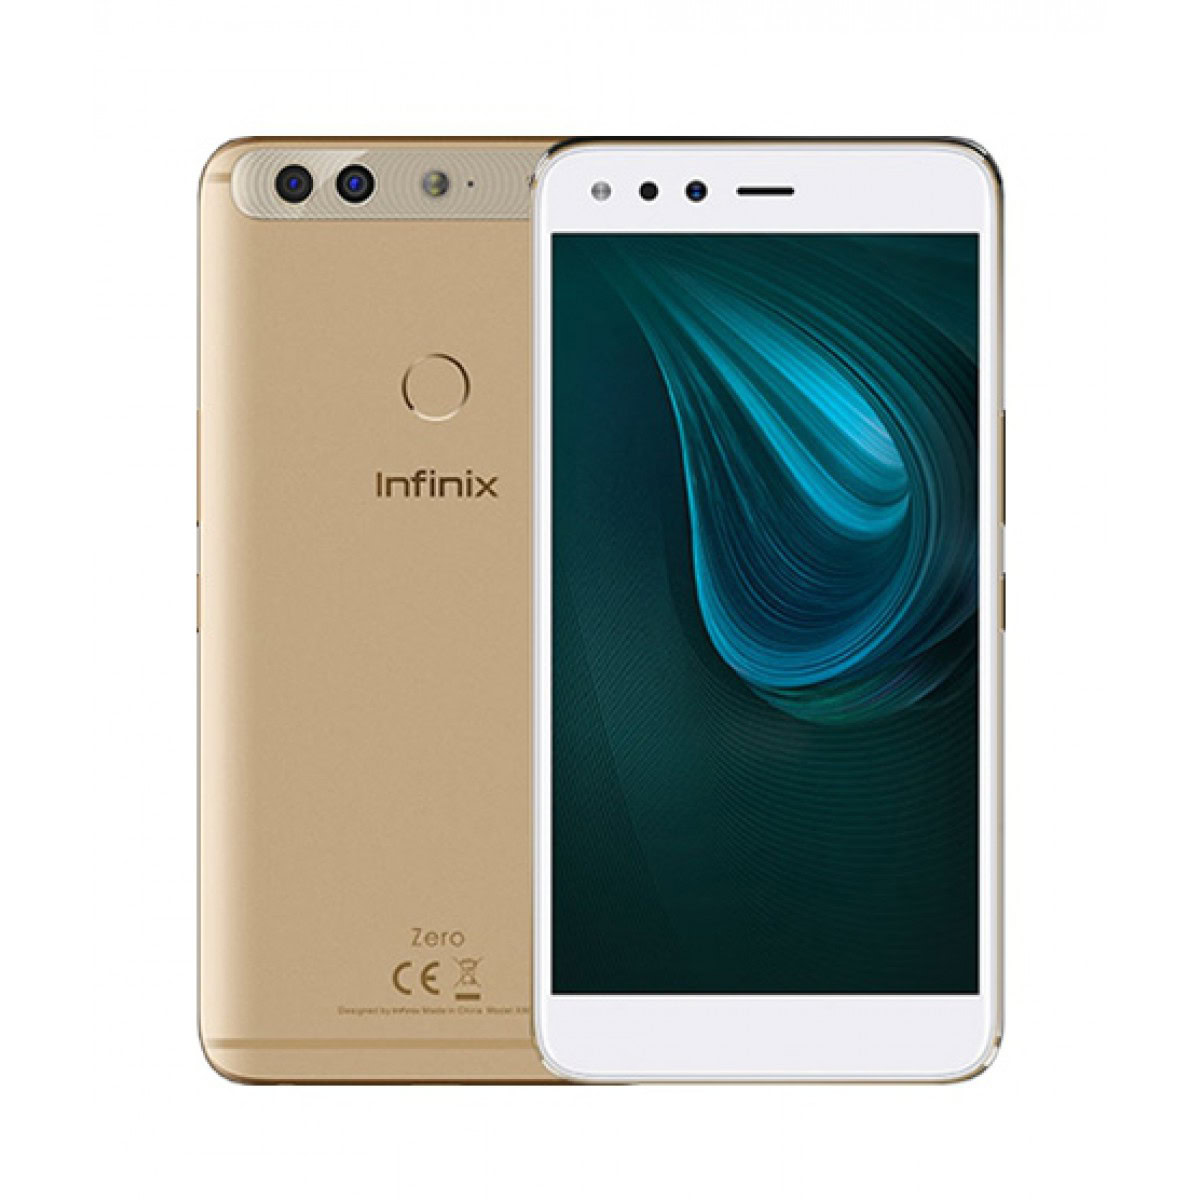 Infinix Zero 5 Pro Mobile Price In Pakistan Infinix Launches Zero 5 Smartphone With Dual Rear Camera System News News Smartphone 19 Reviews Latest Mobile Phones In India